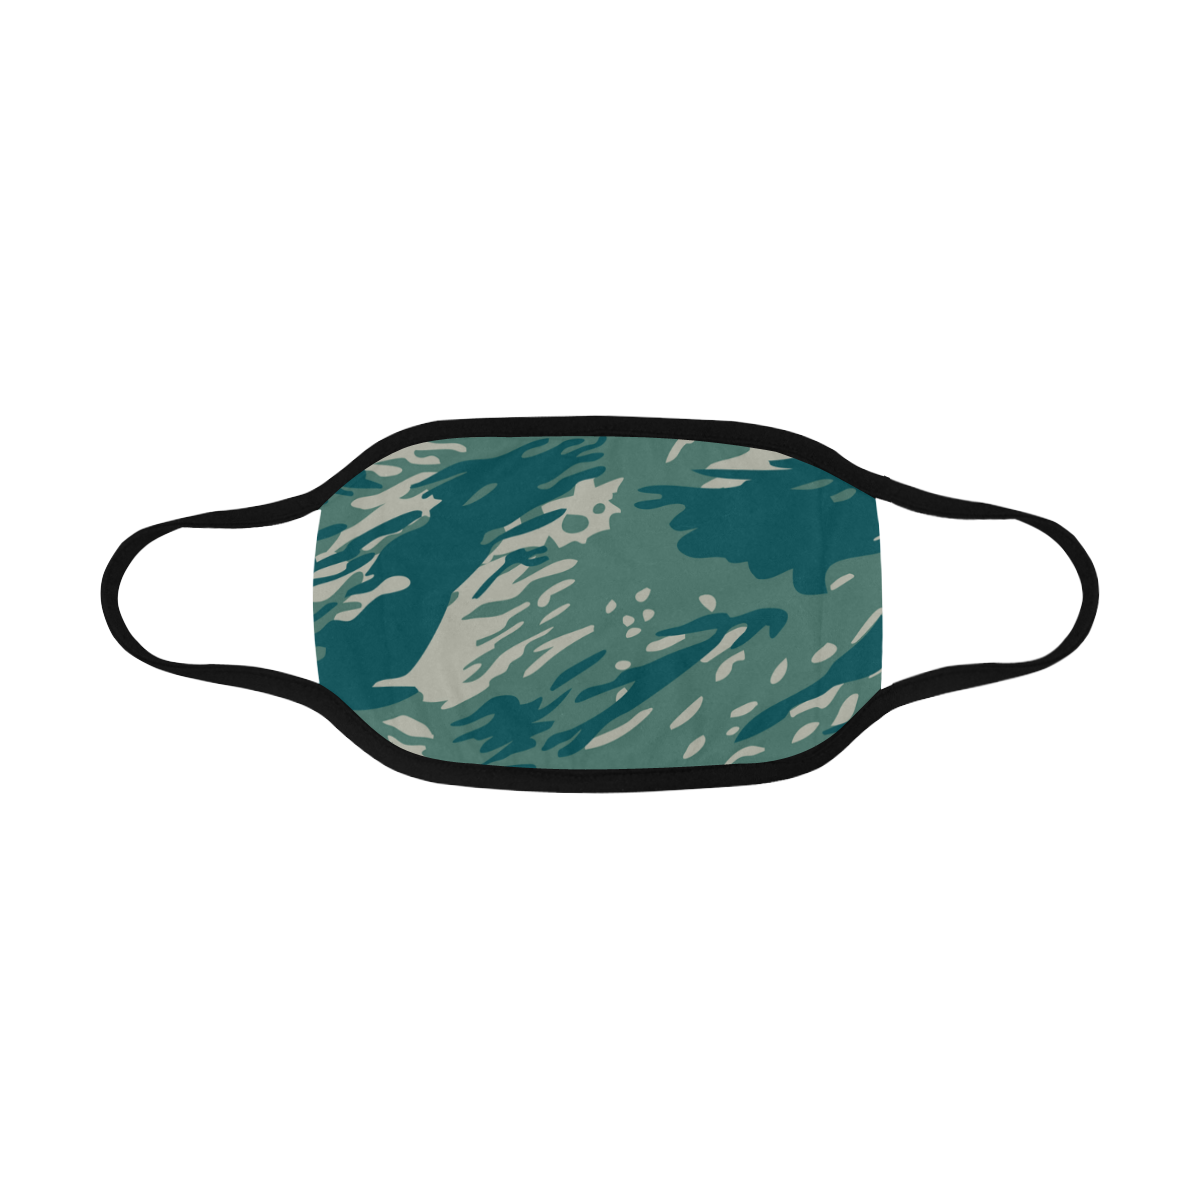 dark blue and green camo Mouth Mask